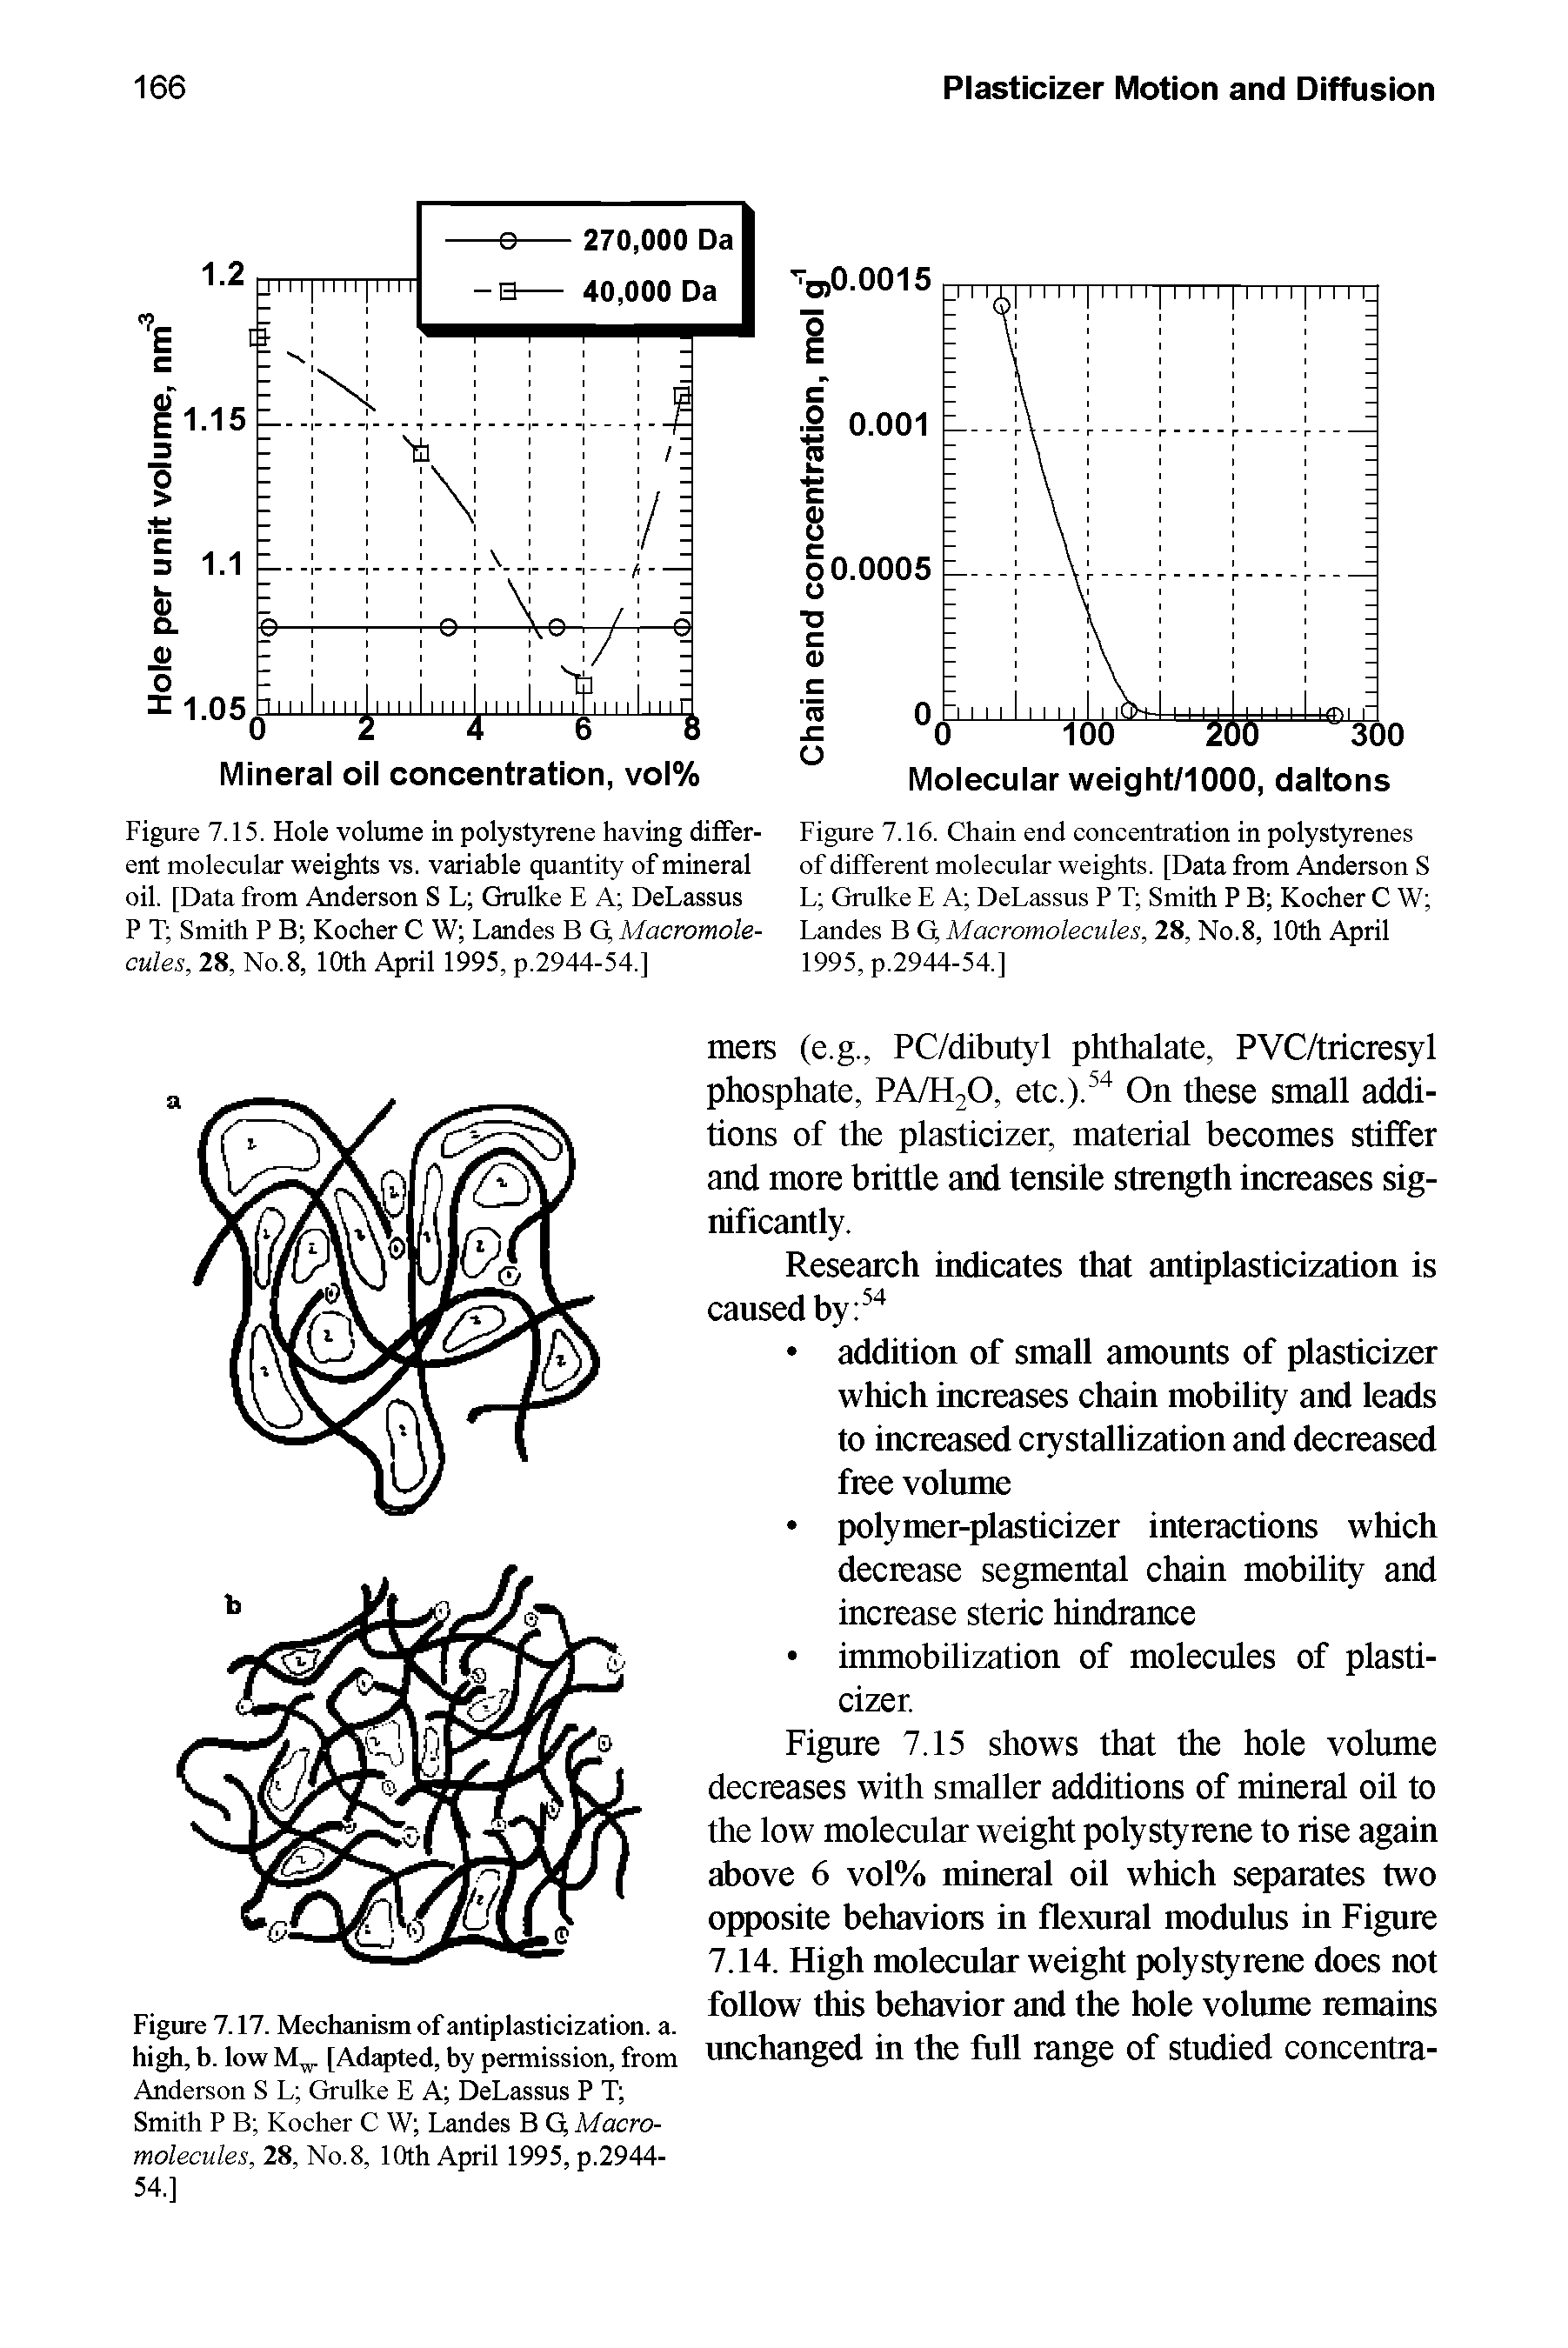 Figure 7.15 shows that the hole volume decreases with smaller additions of mineral oil to the low molecular weight polystyrene to rise again above 6 vol% mineral oil which separates two opposite behaviors in flexural modulus in Figure 7.14. High molecular weight polystyrene does not follow this behavior and the hole volume remains unchanged in the fiill range of studied concentra-...